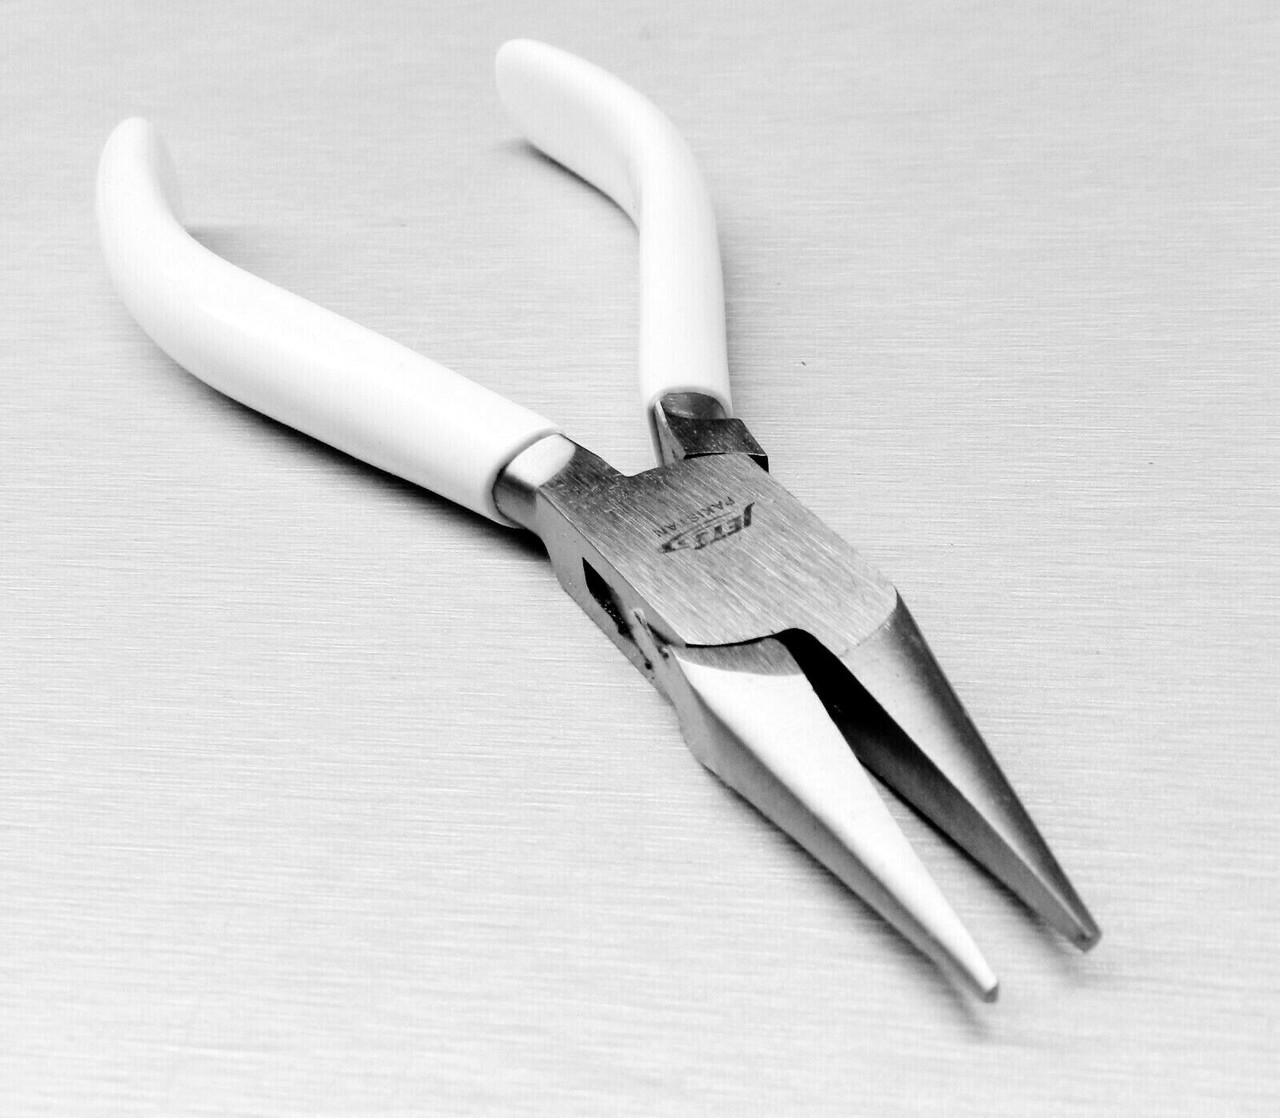 6-1/2" Chain Nose Pliers Large Metalsmith Silversmith Thick Gauge Work HD 165mm